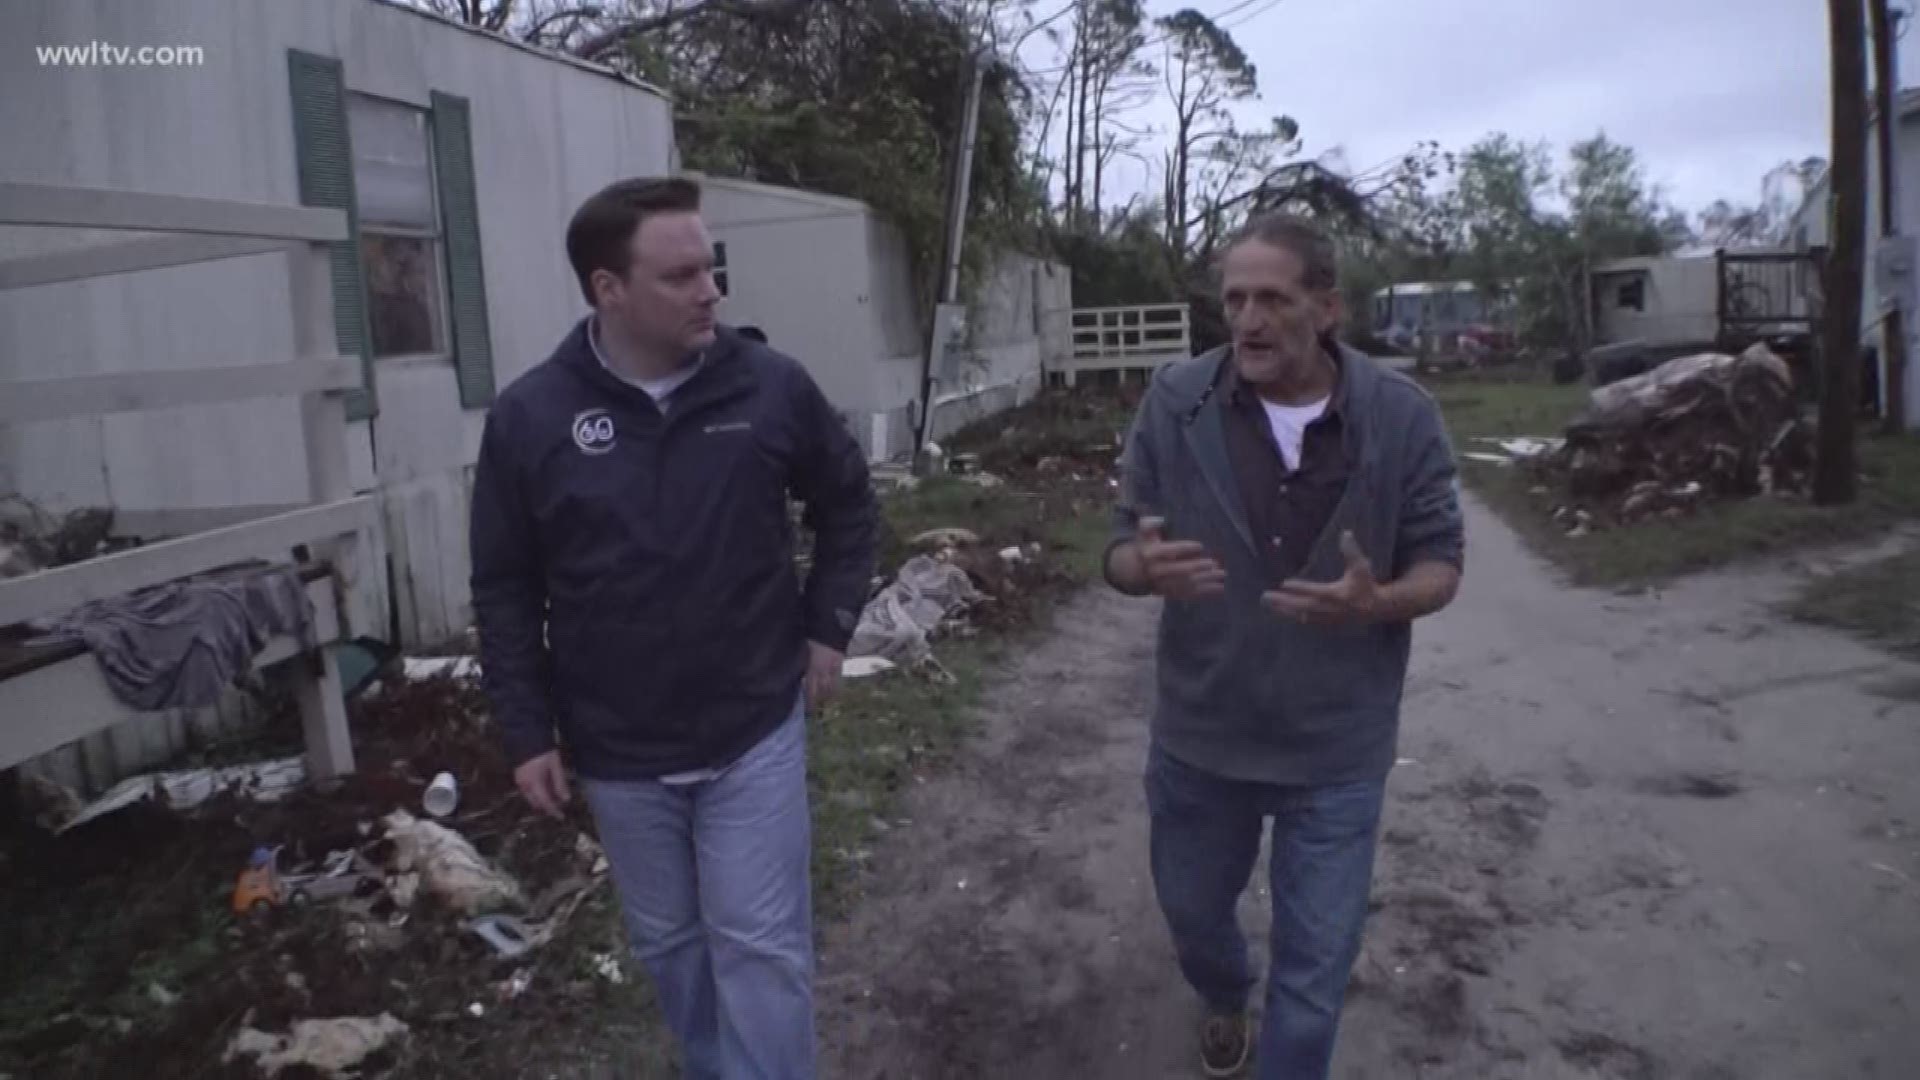 Meteorologist Chris Franklin returns to the Florida panhandle one month after Hurricane Michael made landfall to see how recovery is coming along.